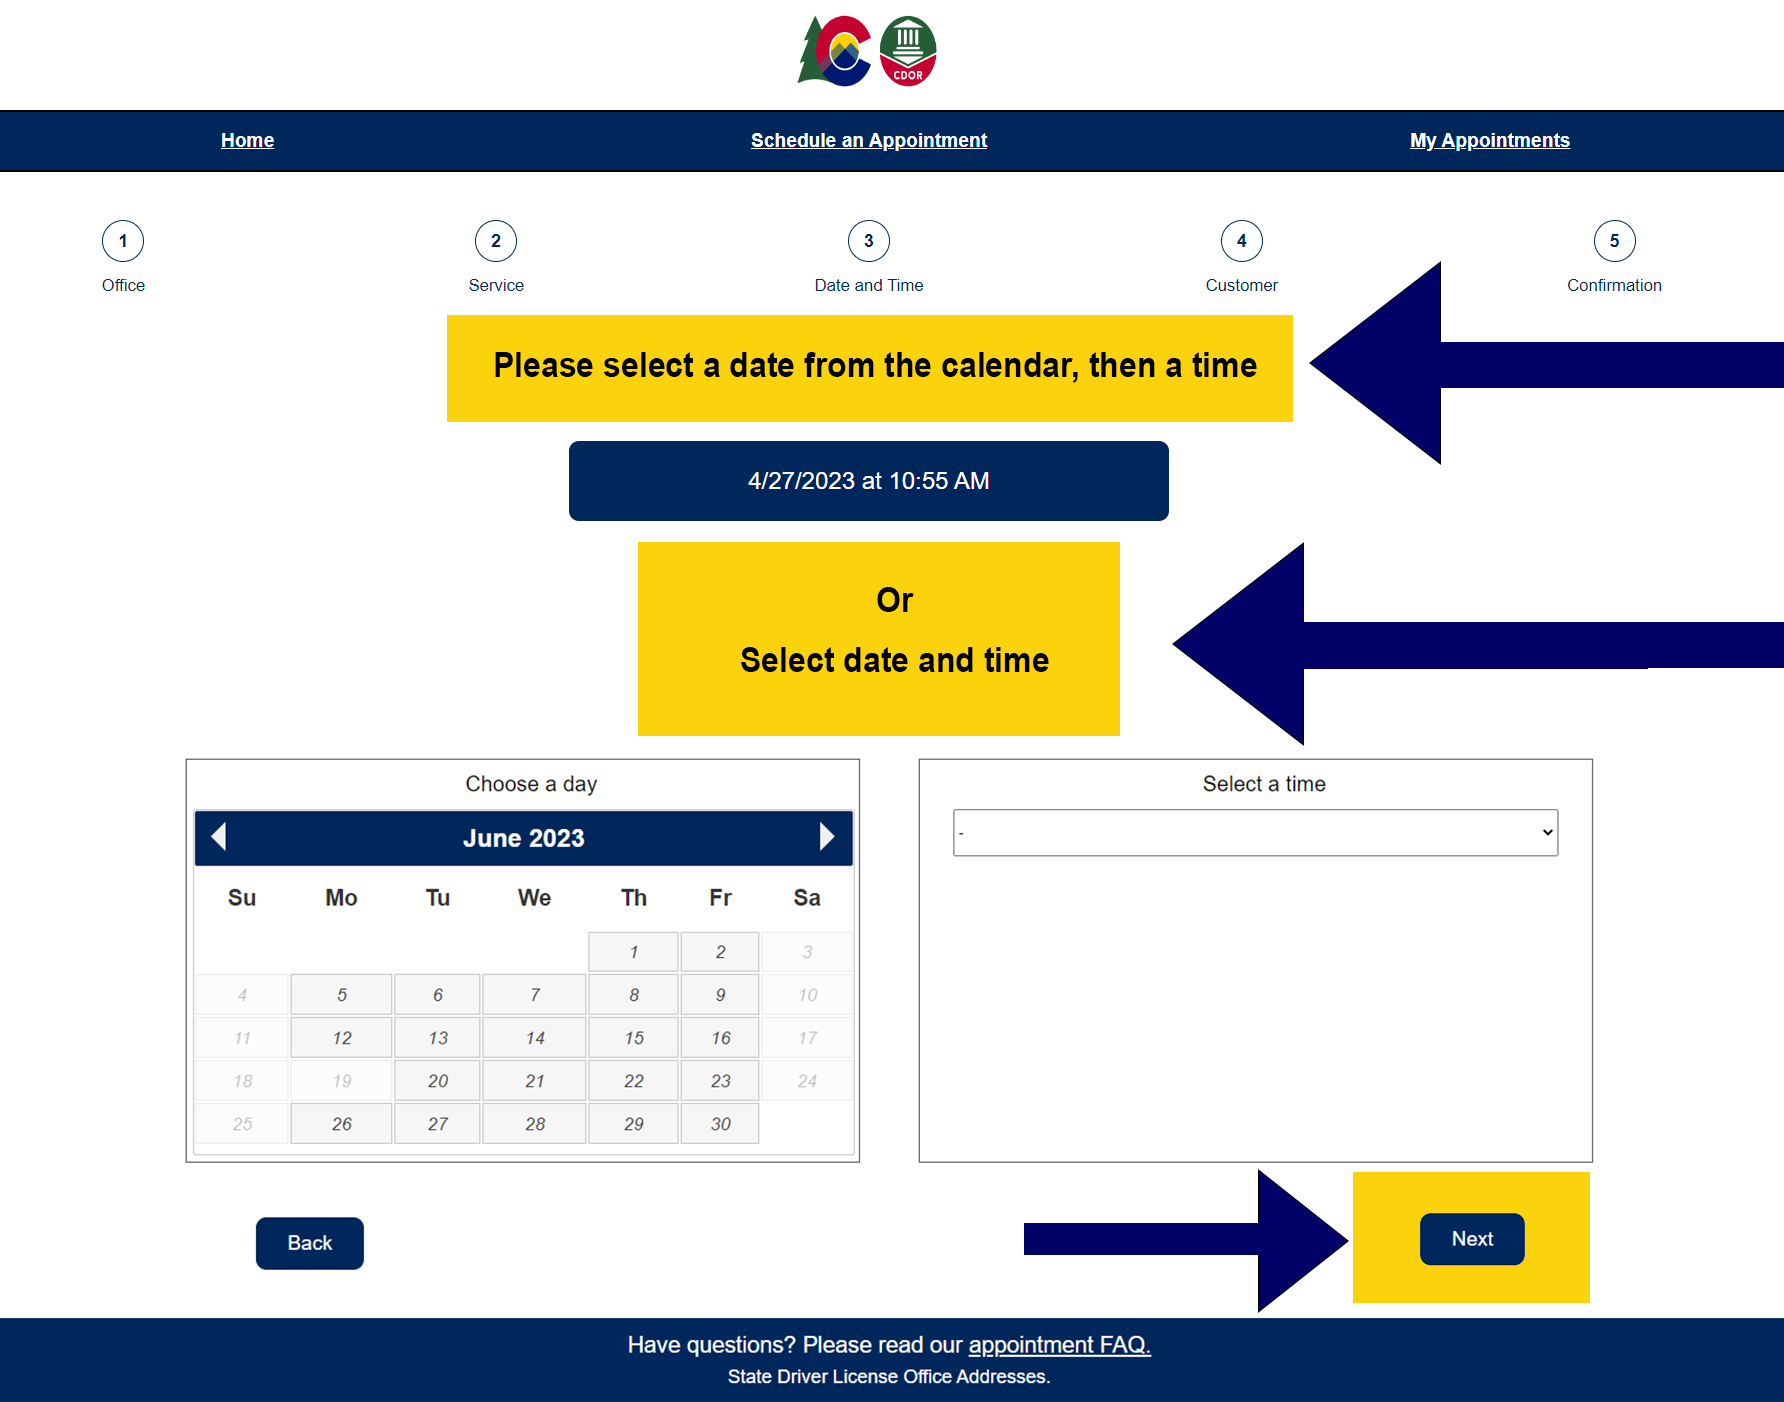 Screen view of myDMV step 5. You can select the first available date and time in the top blue button, or select a date from the calendar in the lower left and available time slots on the right for that date. Click Next to continue